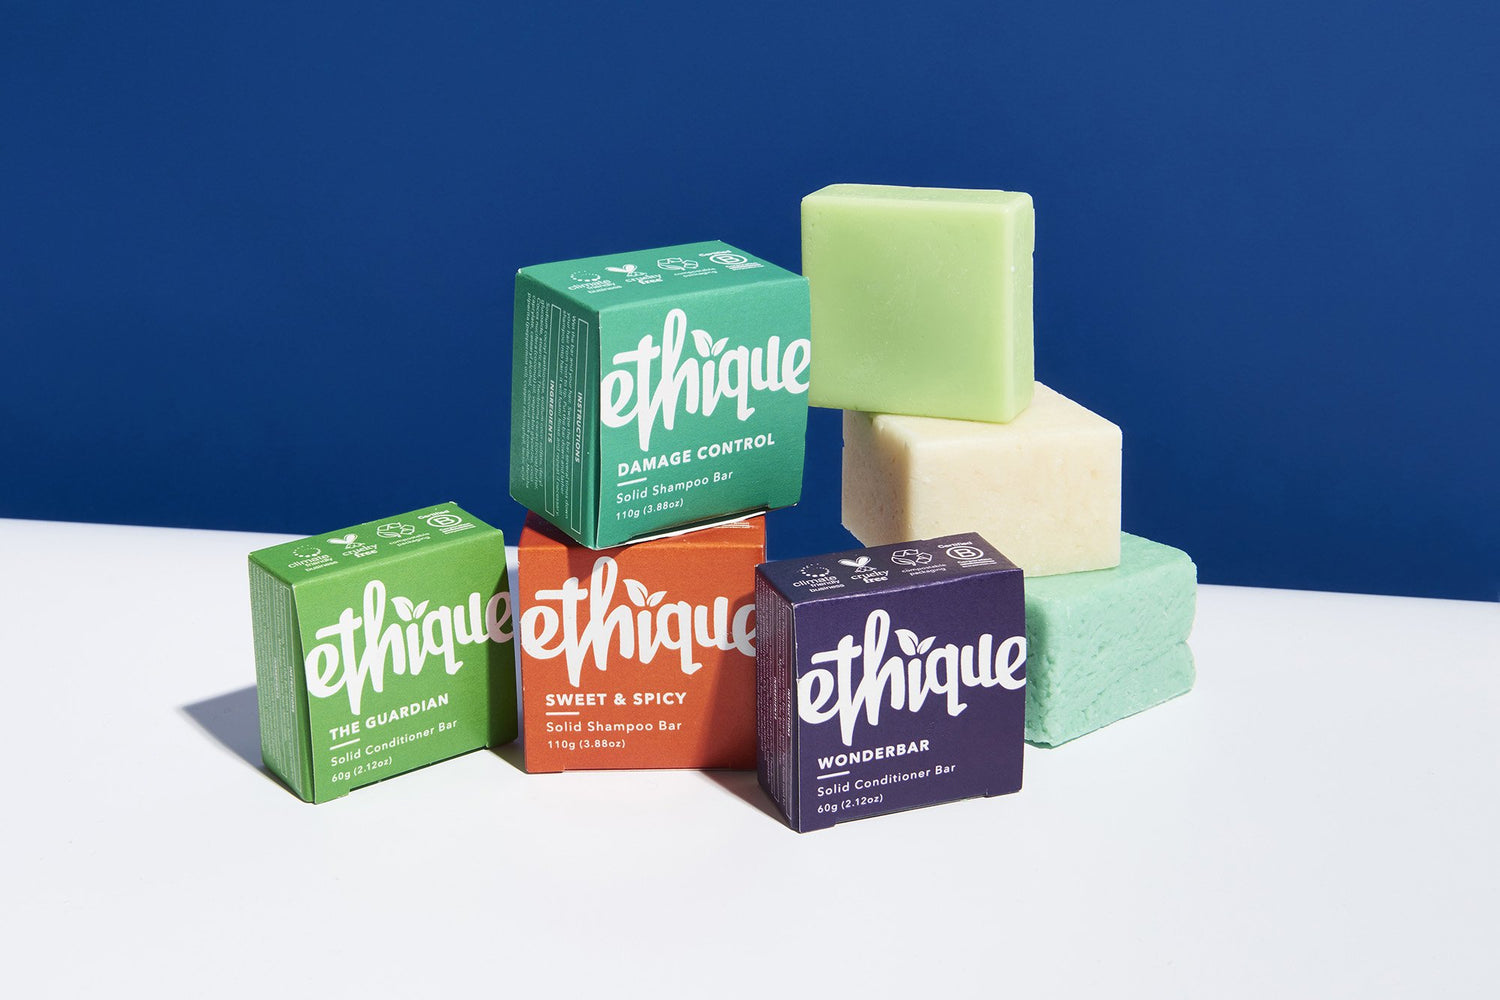 Why are Ethique bars so much more than other 'shampoo bars'?